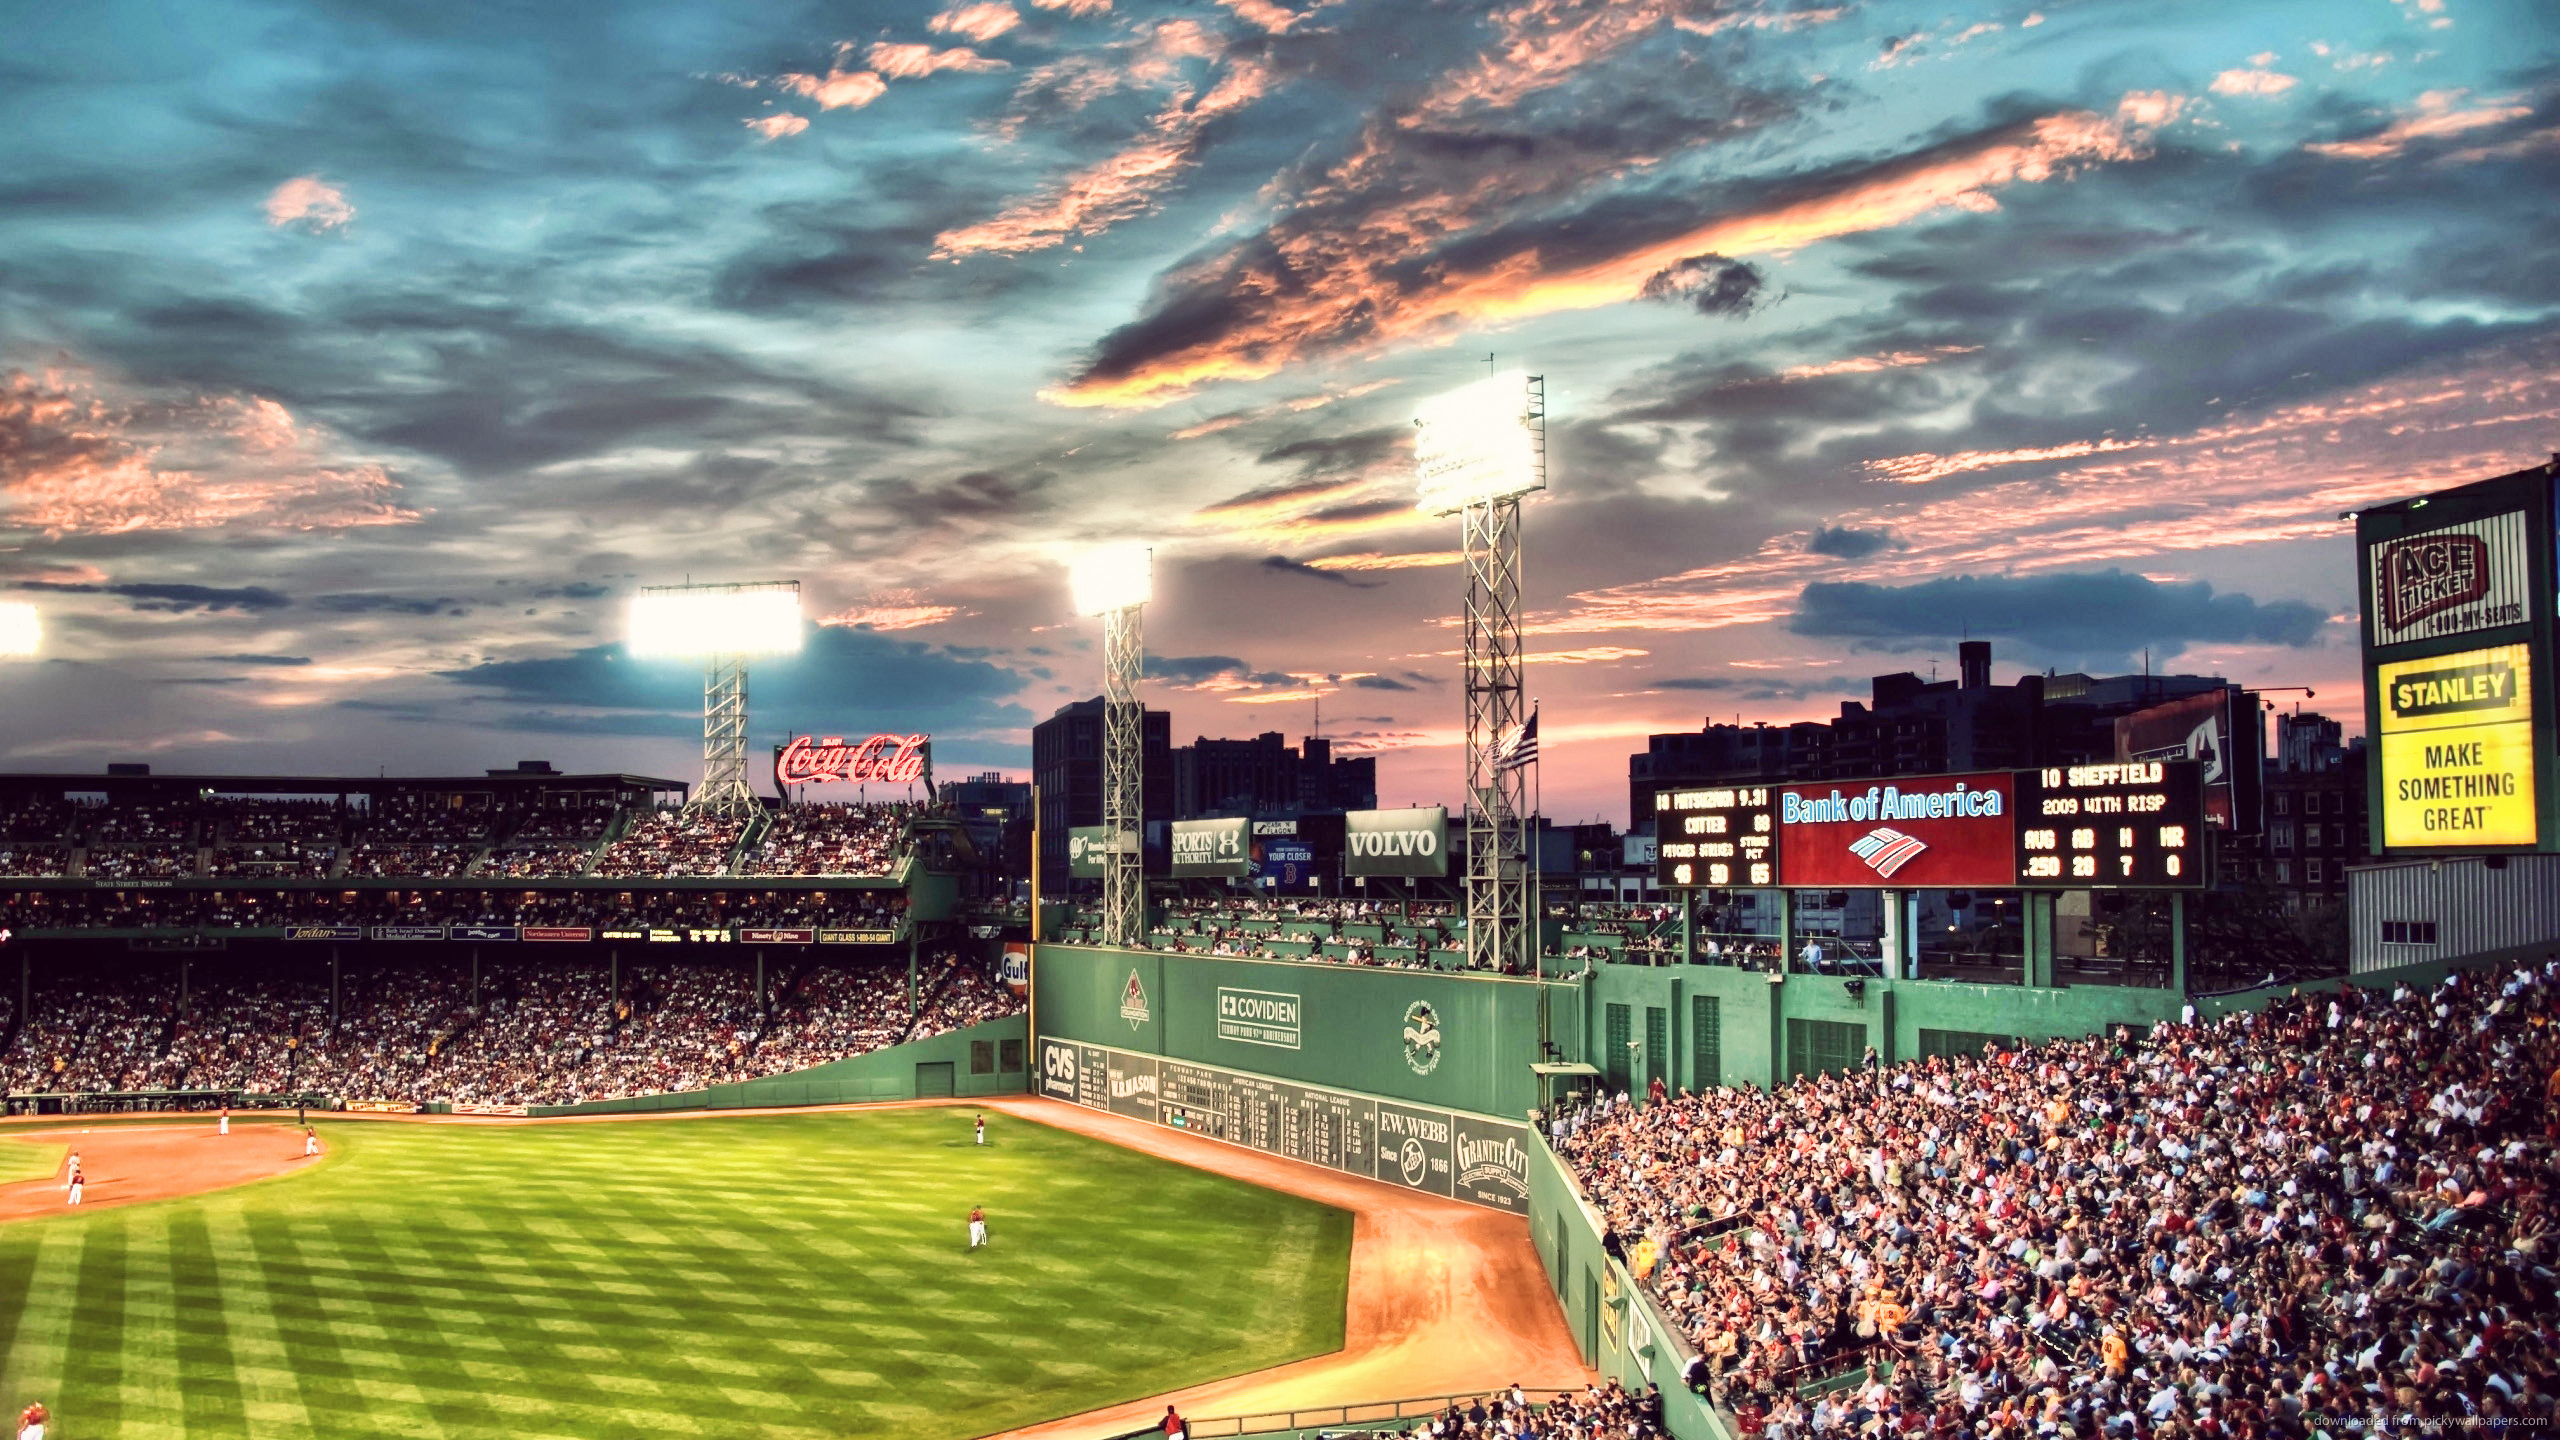 ... Fenway Park for 2560x1440